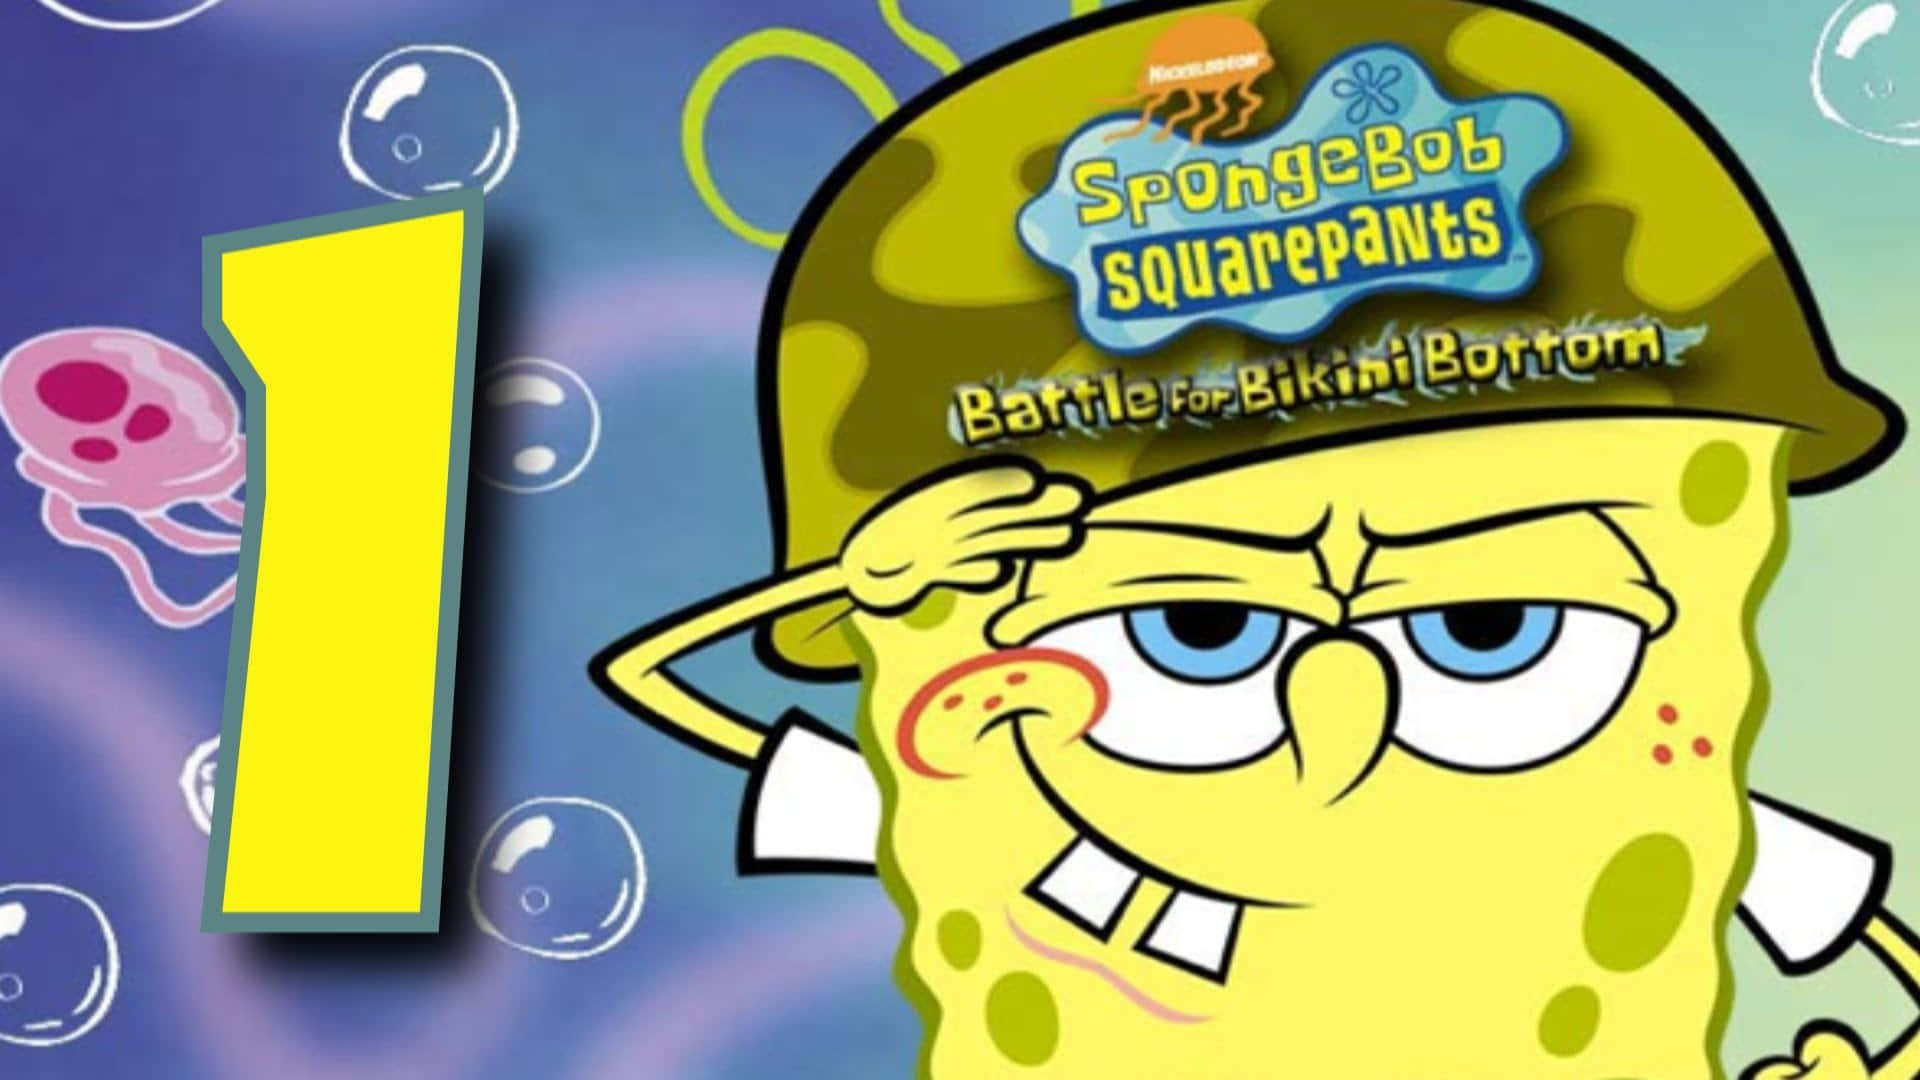 Spongebobpfp Salute Can Be Translated To Spanish As 